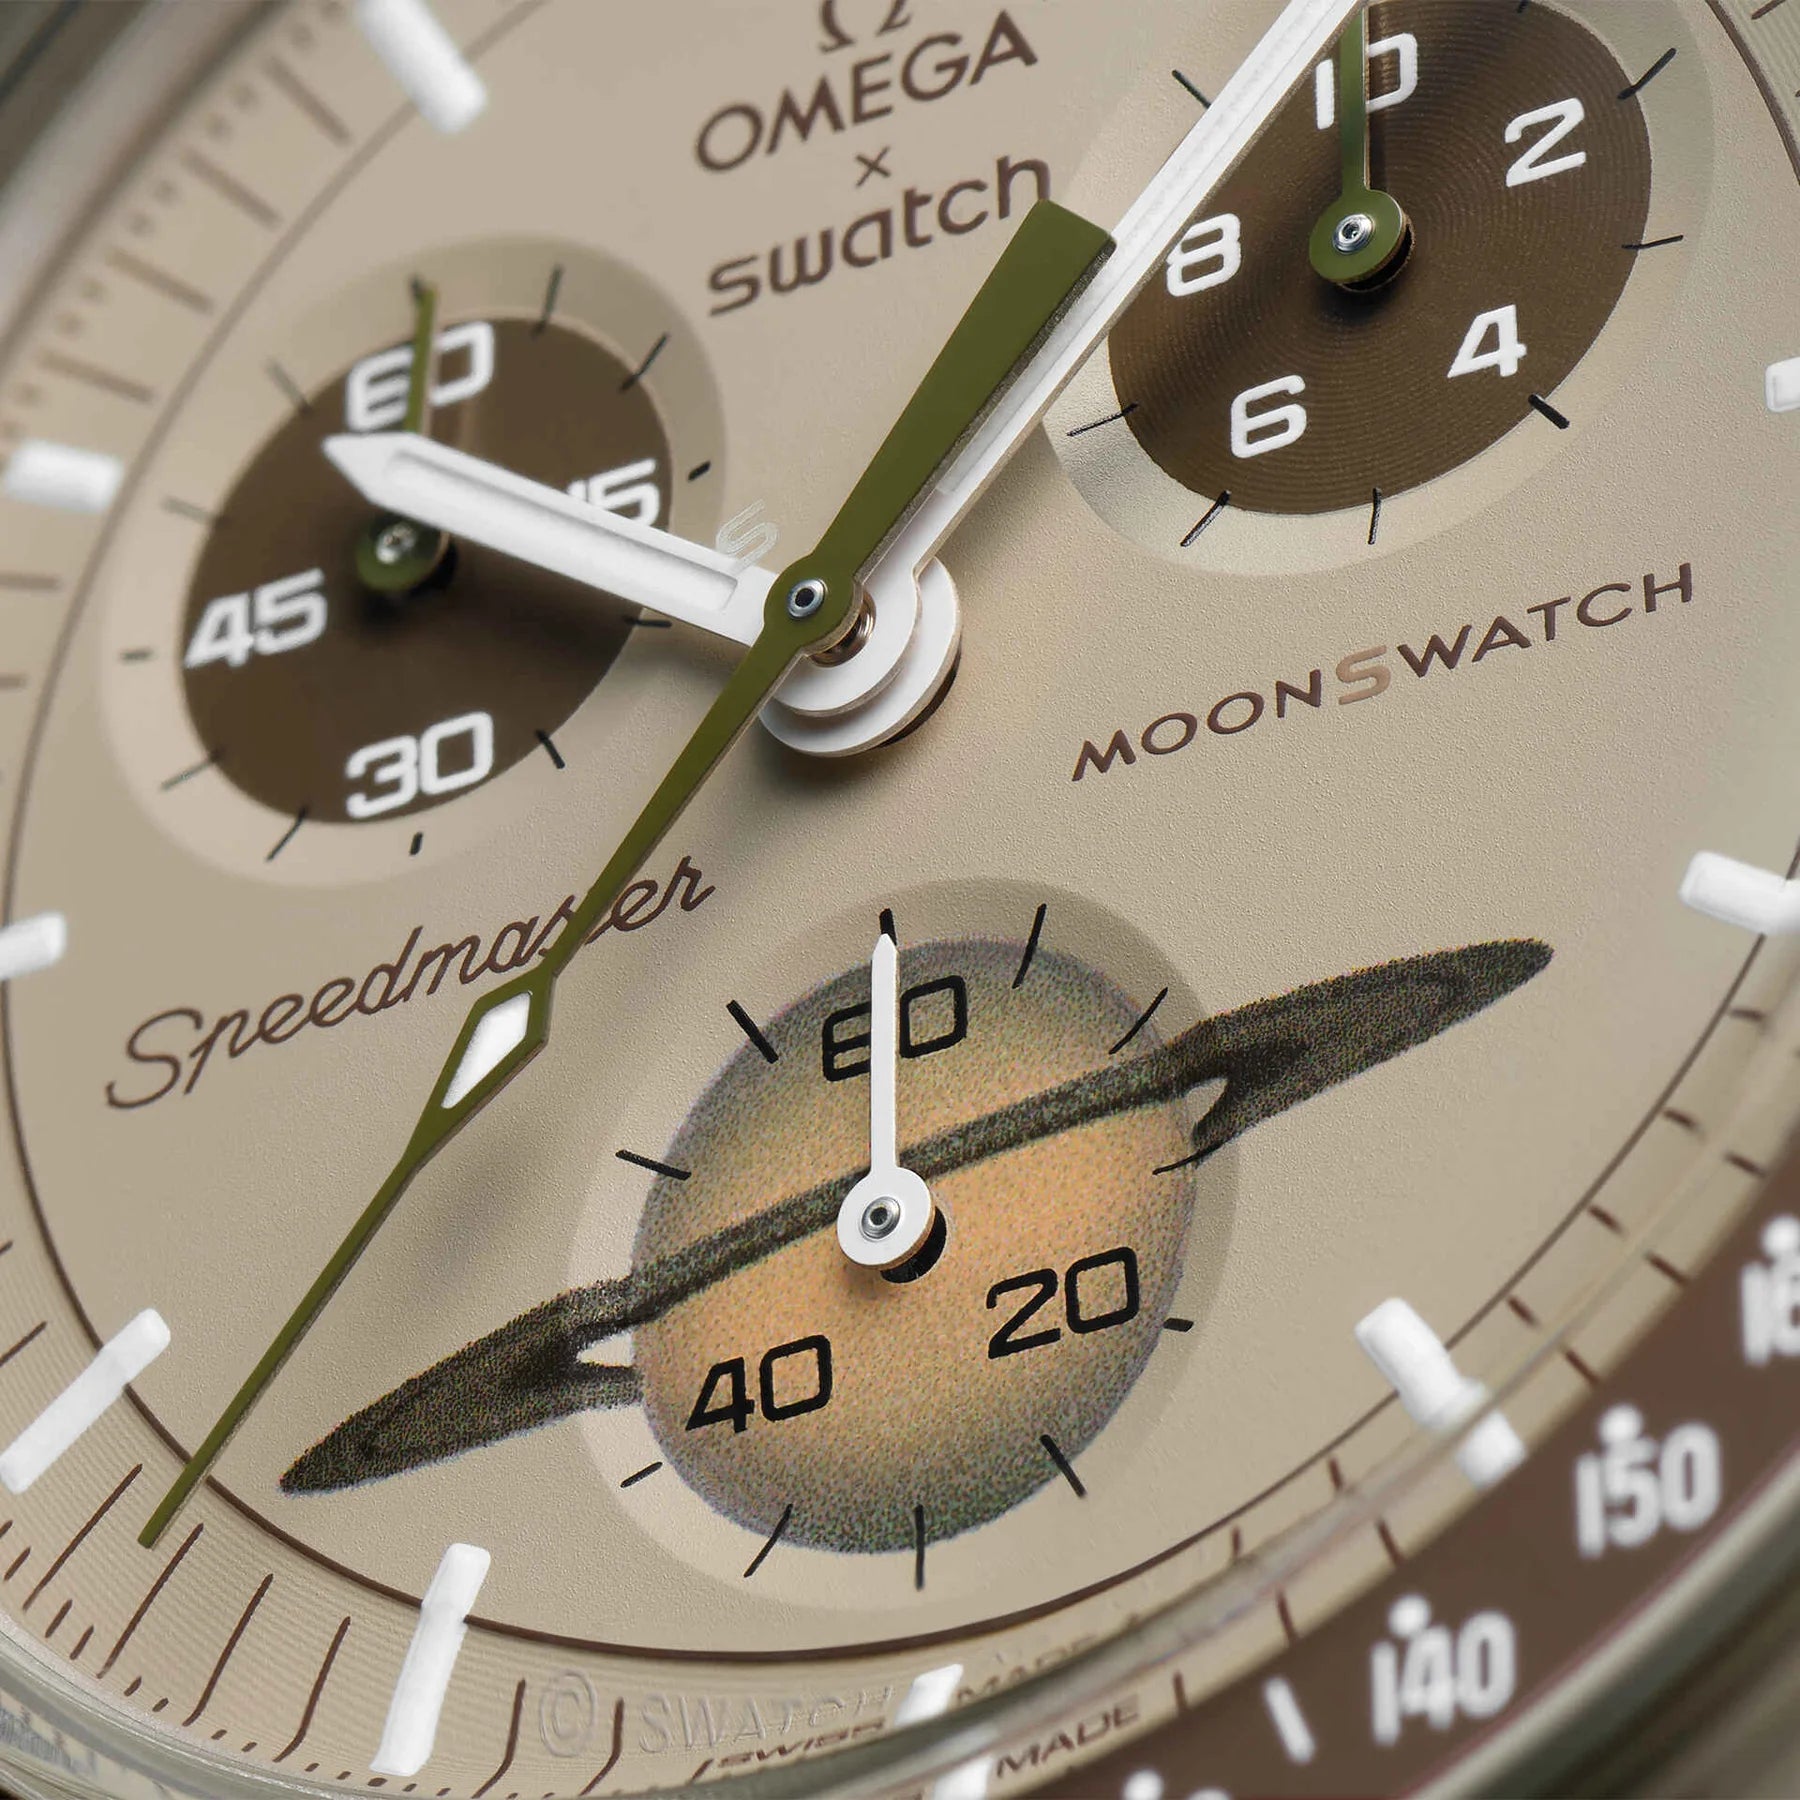 Swatch x Omega Mission to Saturn 